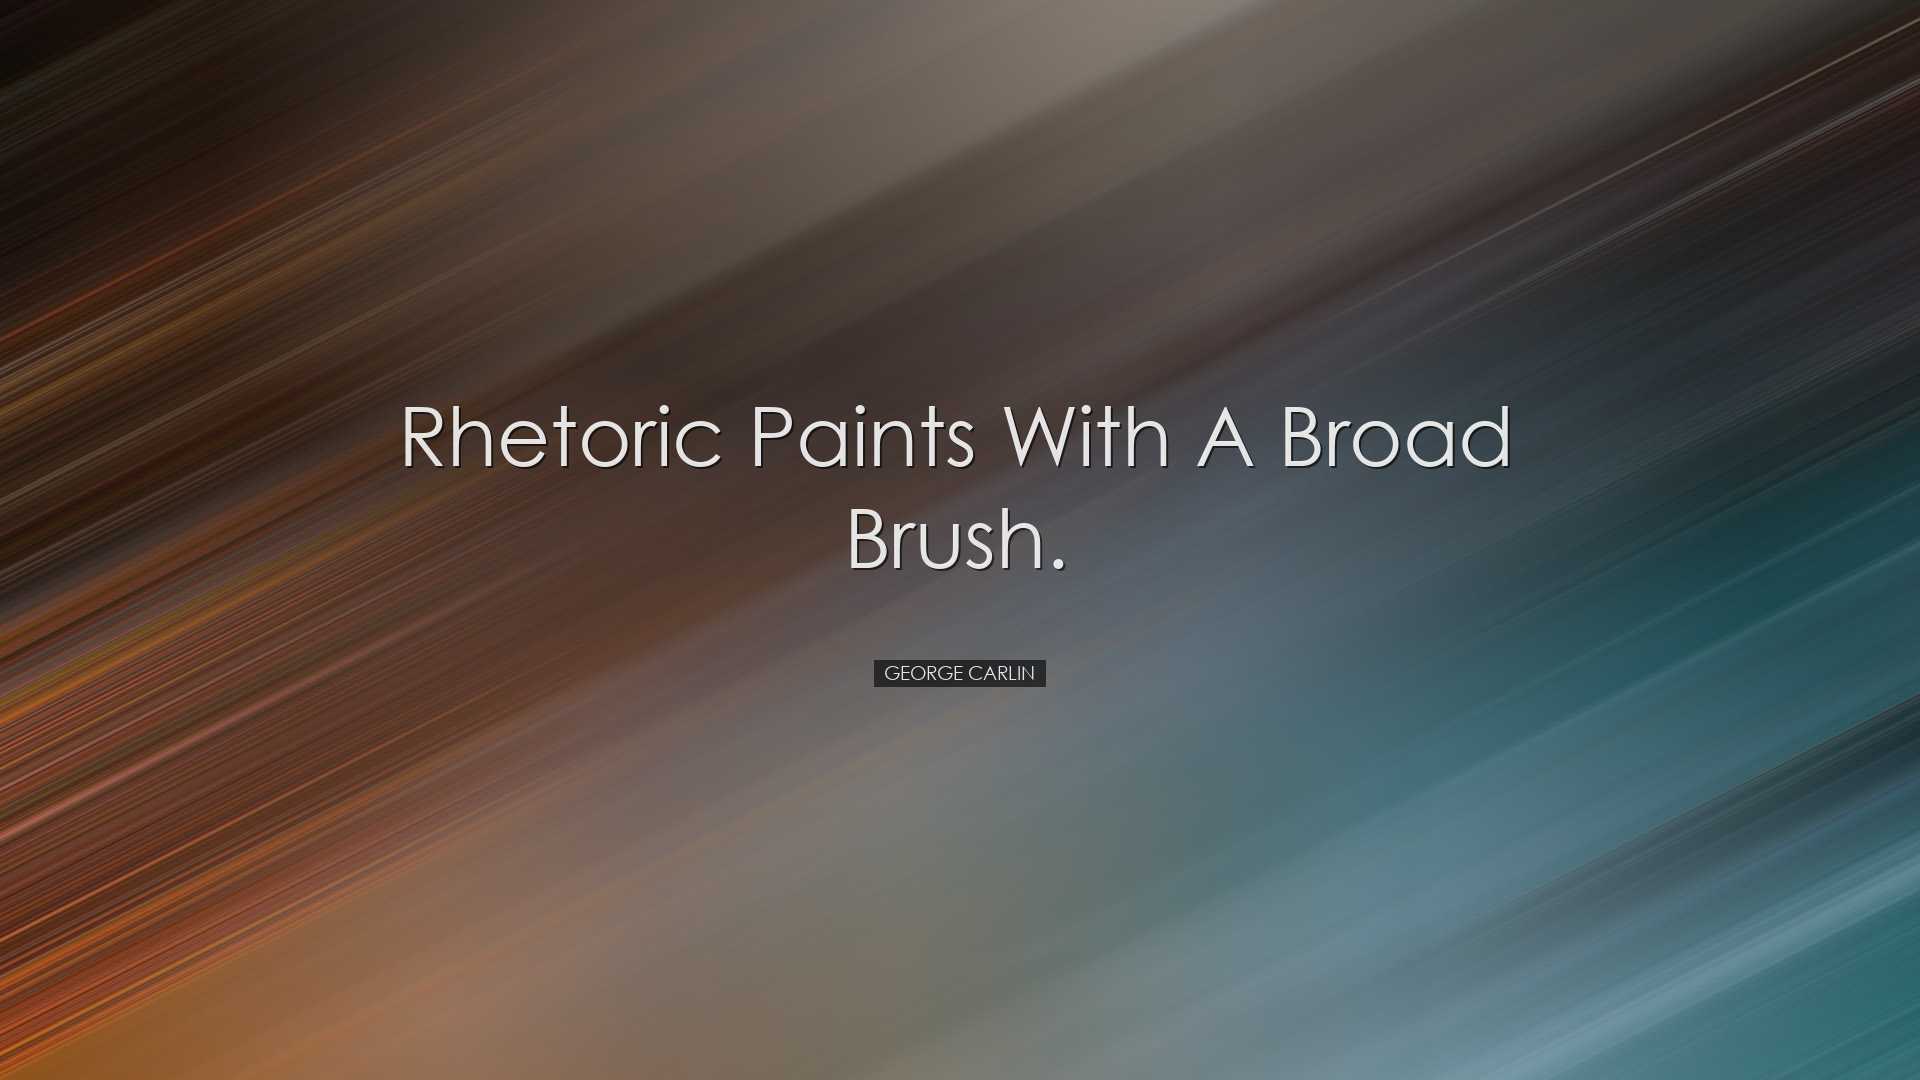 Rhetoric paints with a broad brush. - George Carlin